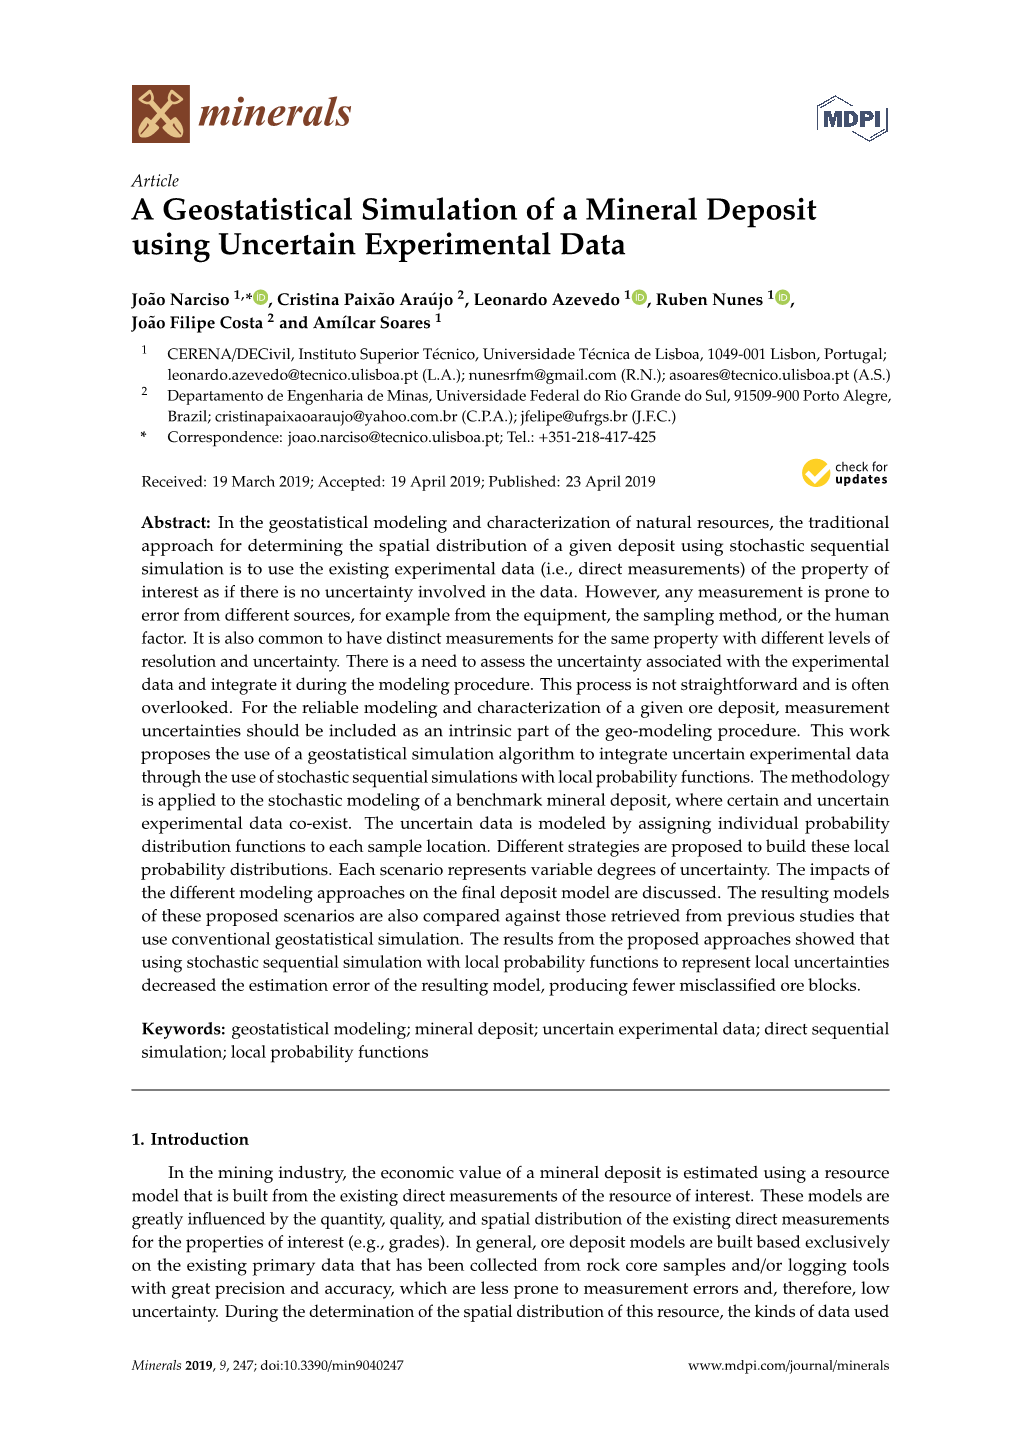 A Geostatistical Simulation of a Mineral Deposit Using Uncertain Experimental Data